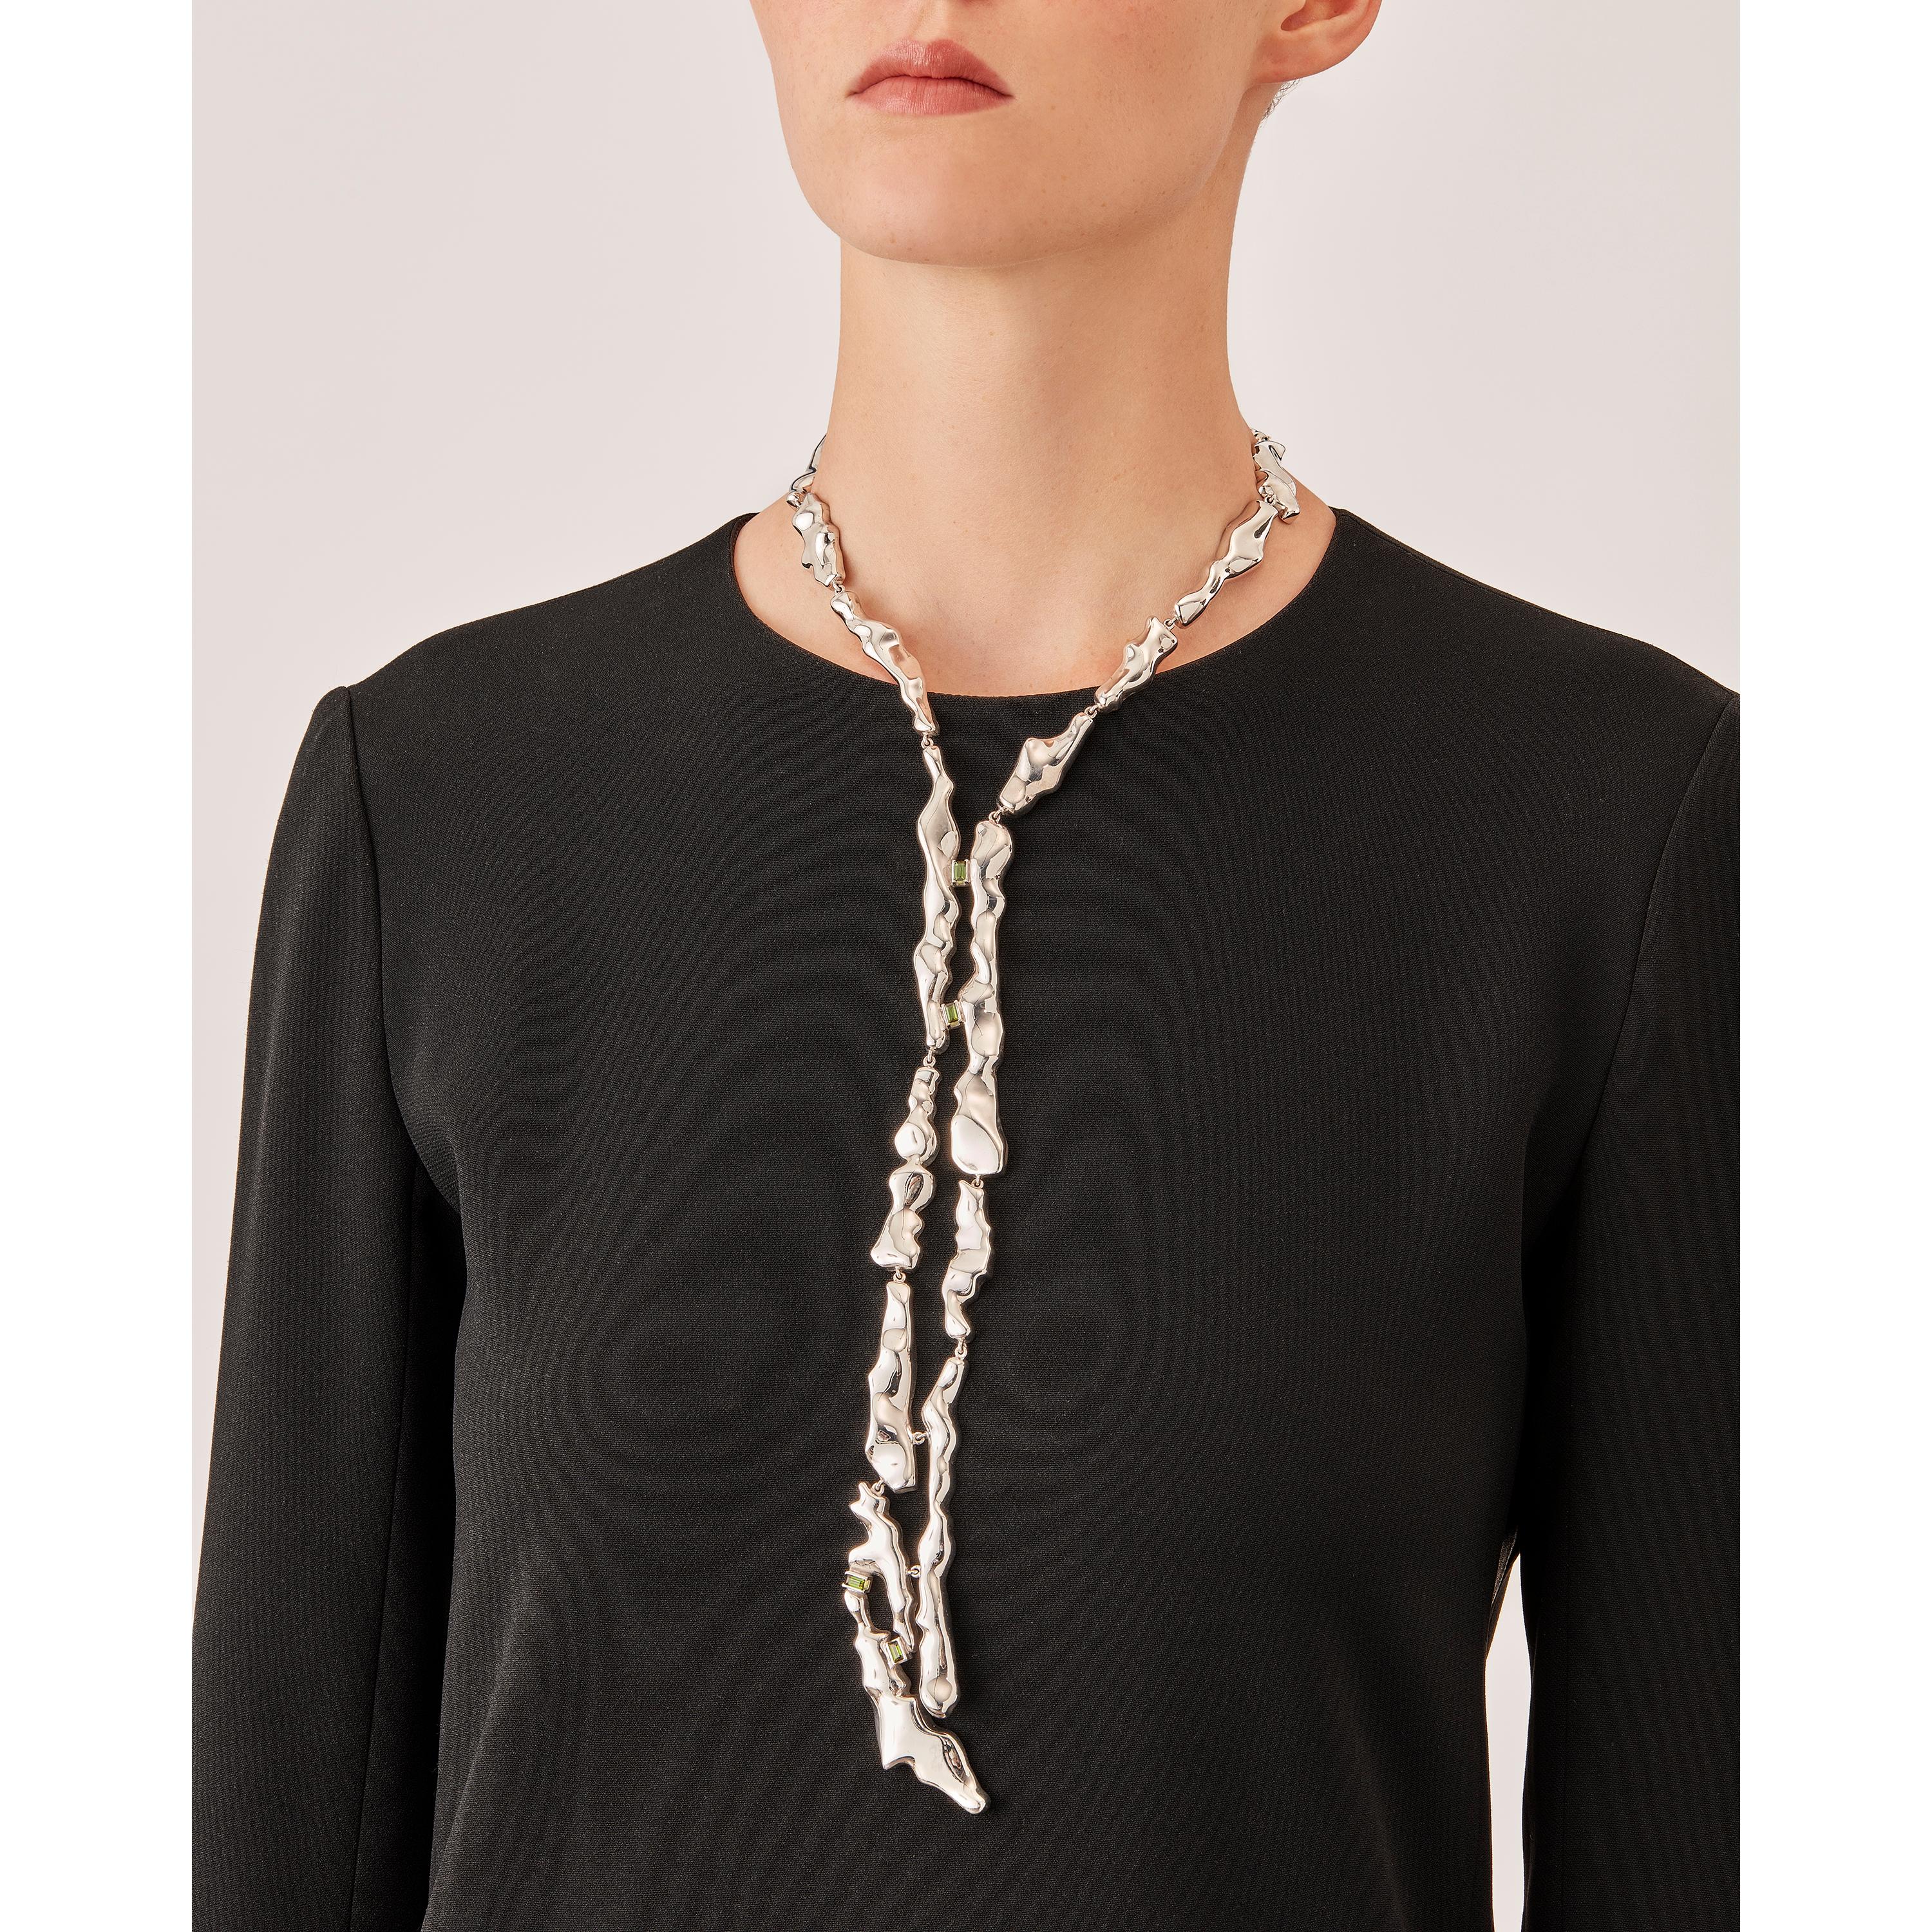 Made by hand in Nathalie Jean's Milan atelier in limited edition, Mercure Tie Necklace is composed of 19 elements of varying dimensions in rhodium plated sterling silver. Clever hidden links allow the pieces to drape nicely around the neck and drop